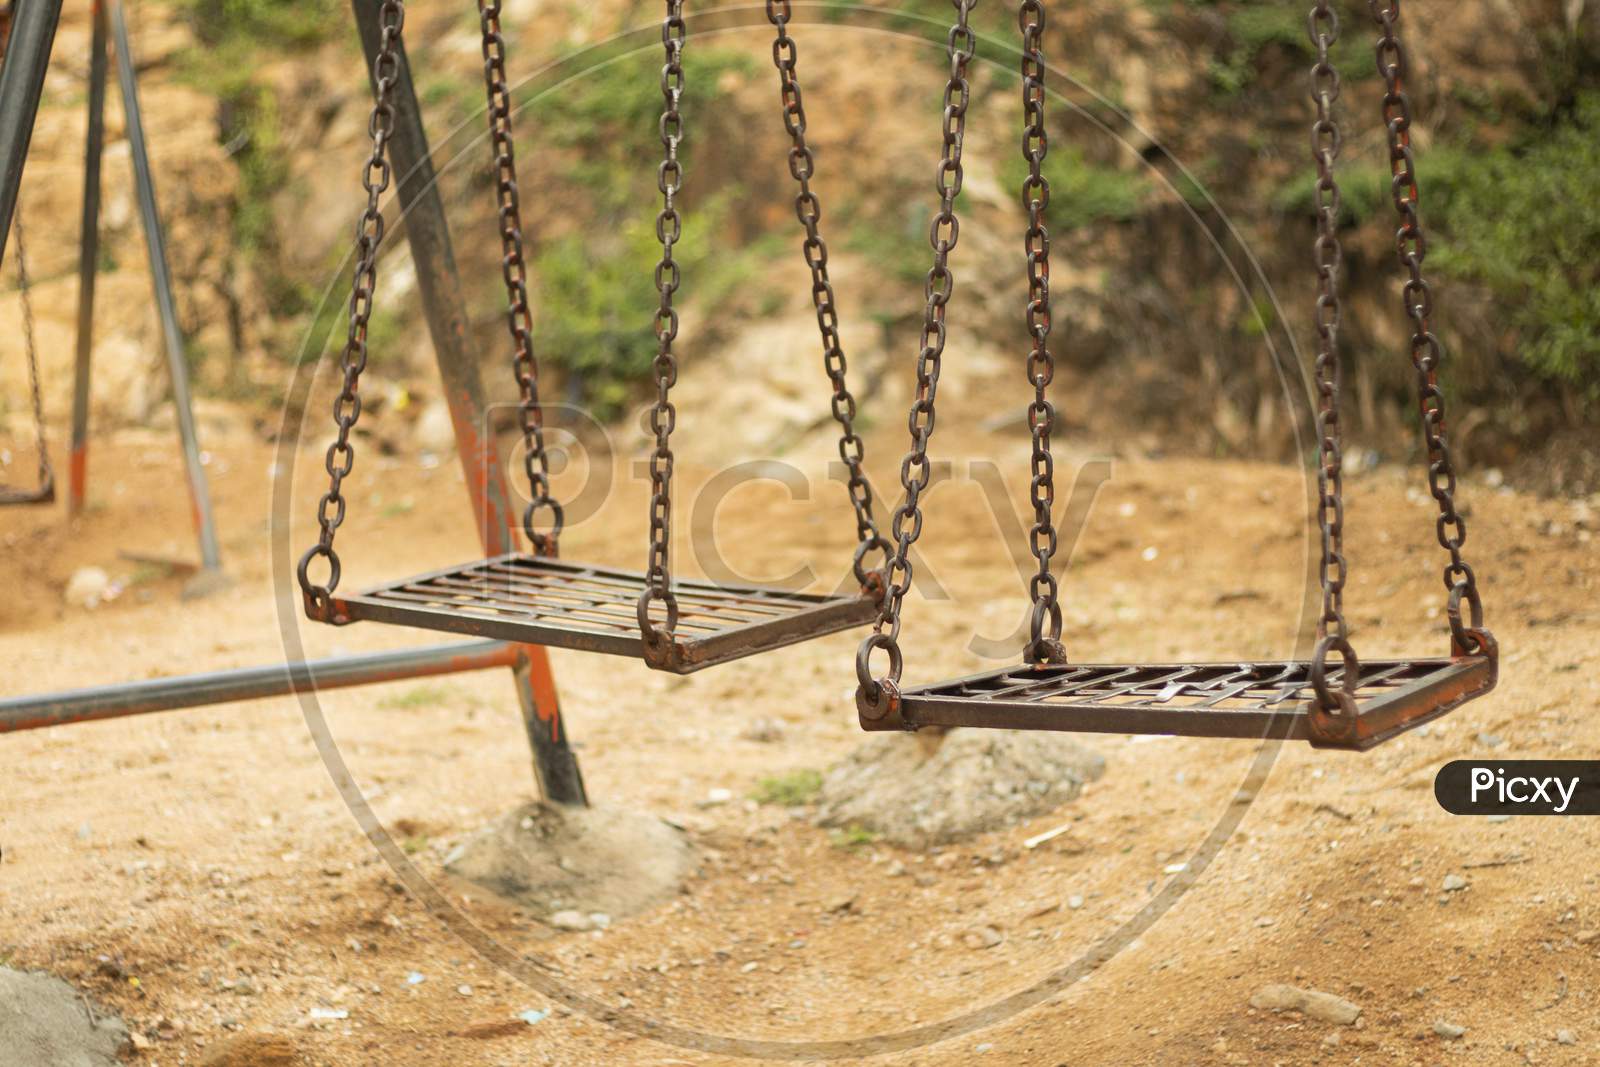 Selective Focus Of Empty Spooky Swing In Desolate Park.